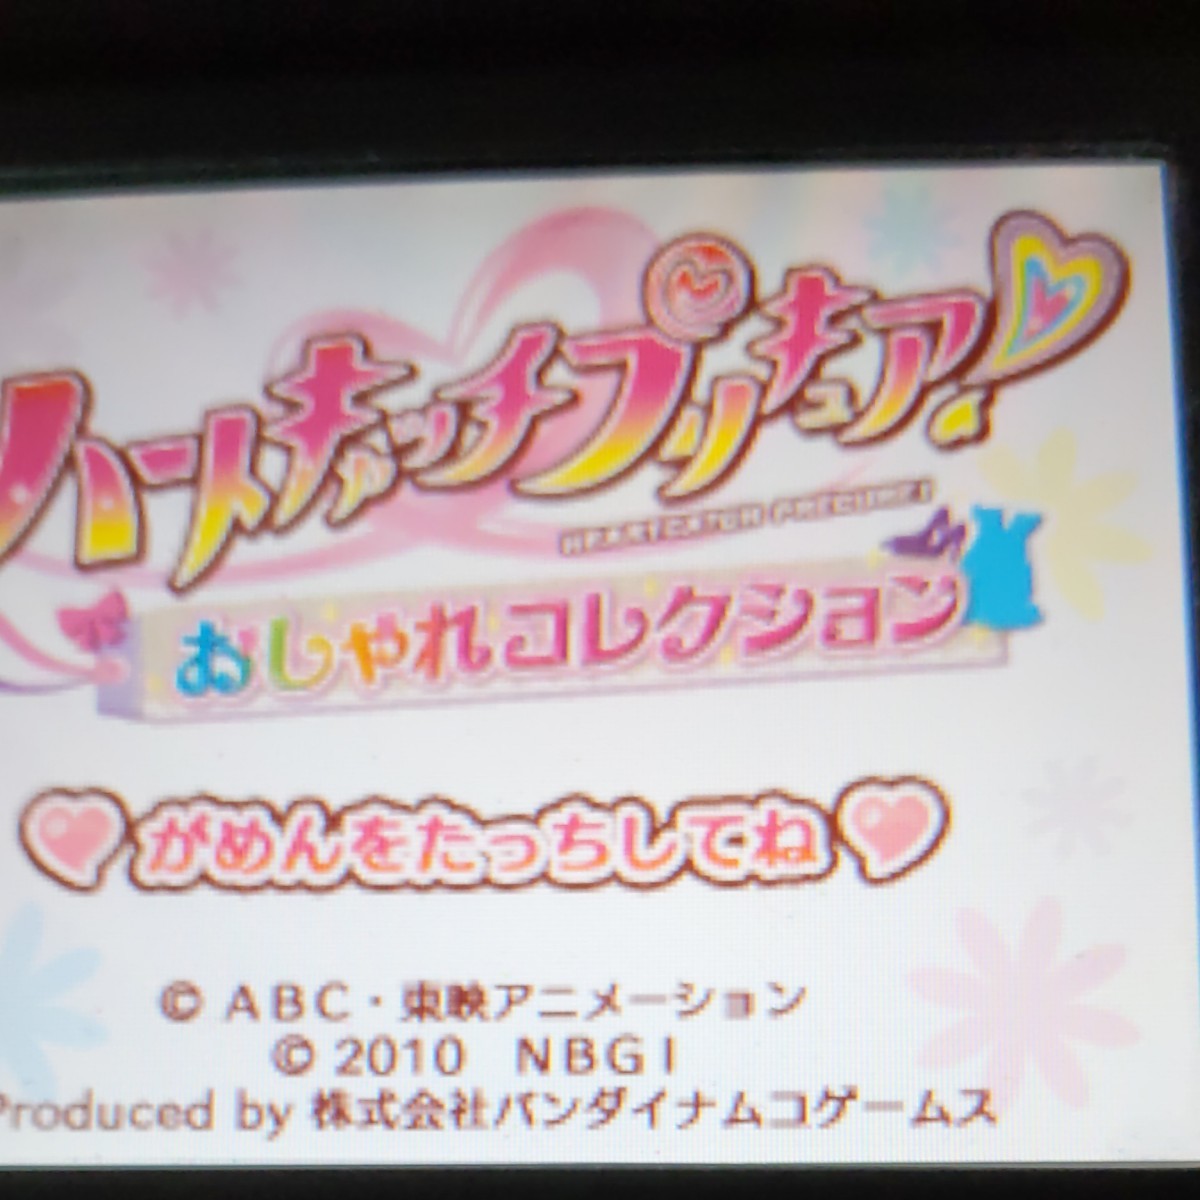 DSソフト プリキュアのゲームソフト4本セット販売